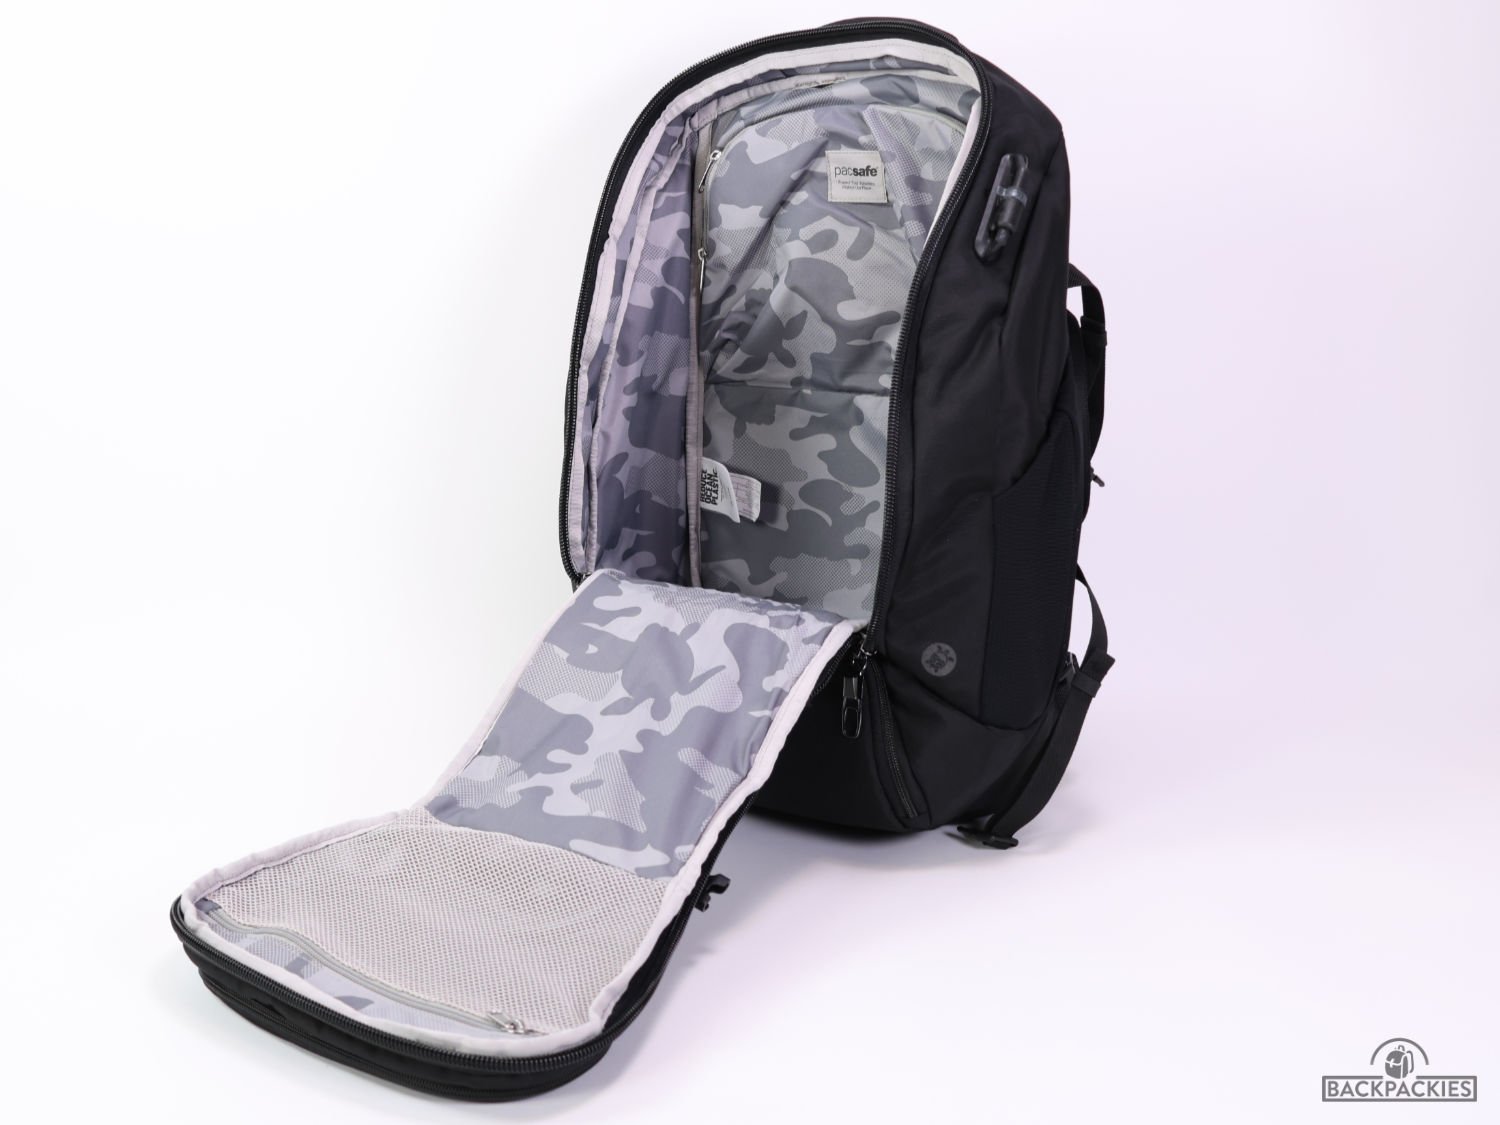 Pacsafe® EXP35 anti-theft travel backpack